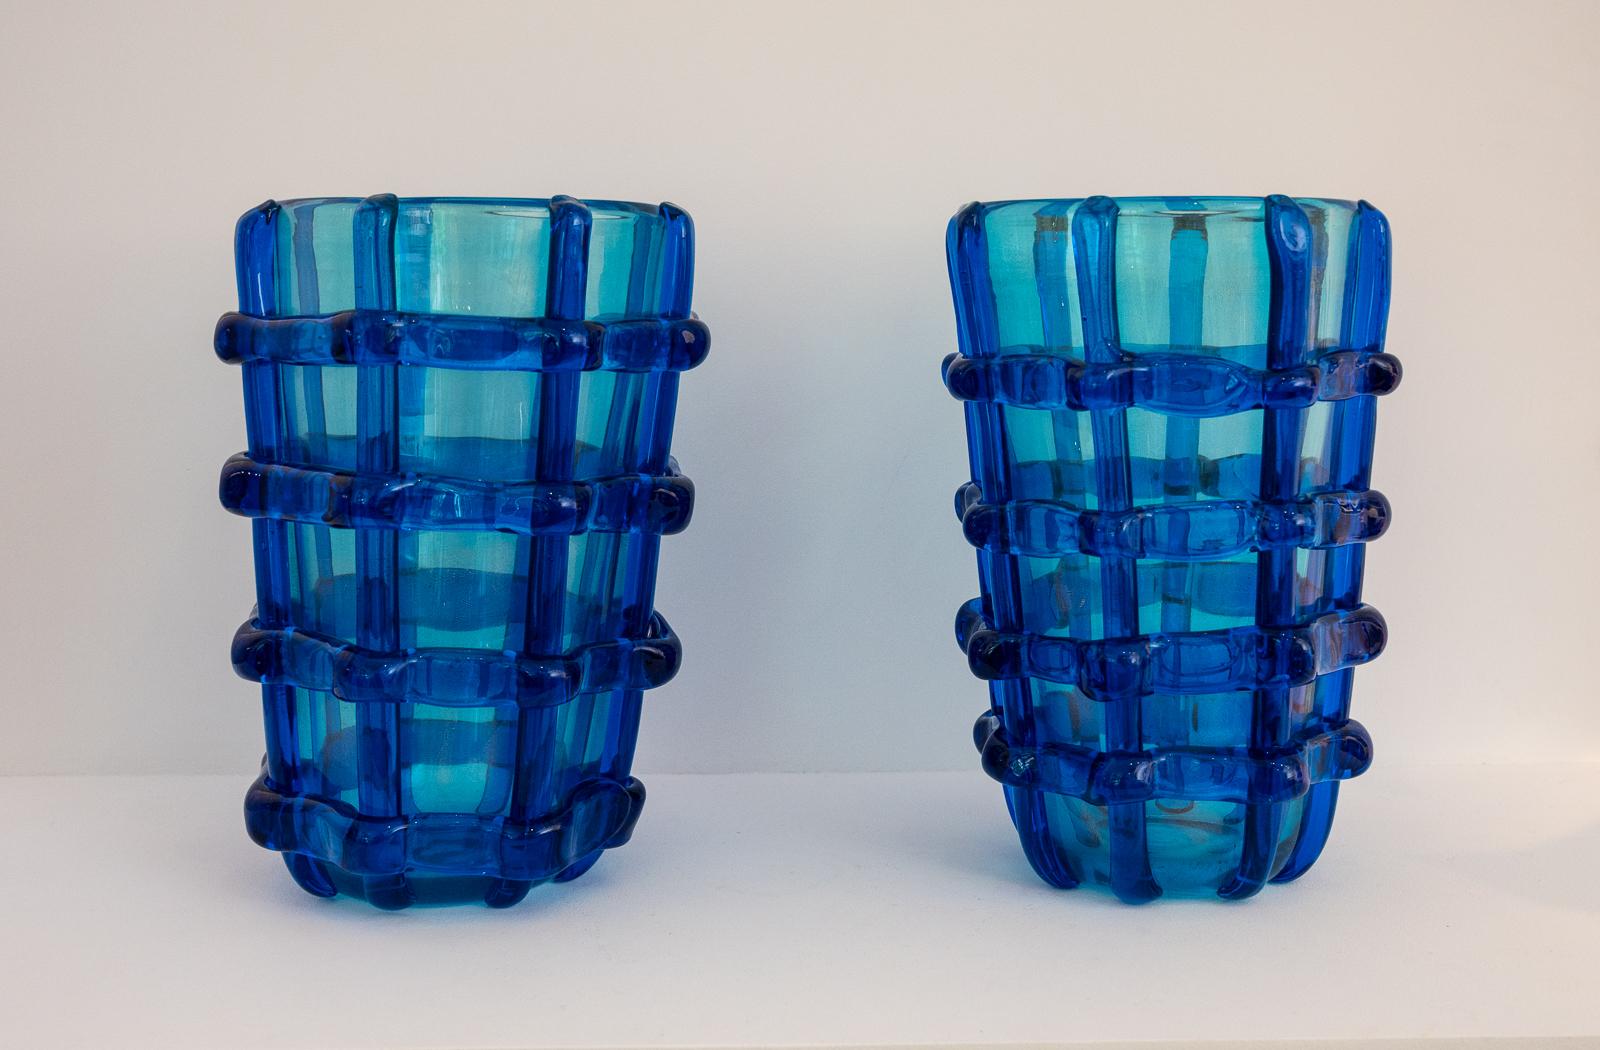 large pair of Murano vases signed Sergio Costantini
Heavy blue Murano glass, applied lattice work decoration with gold inclusions
Murano Italy, 1990s
priced for the pair.